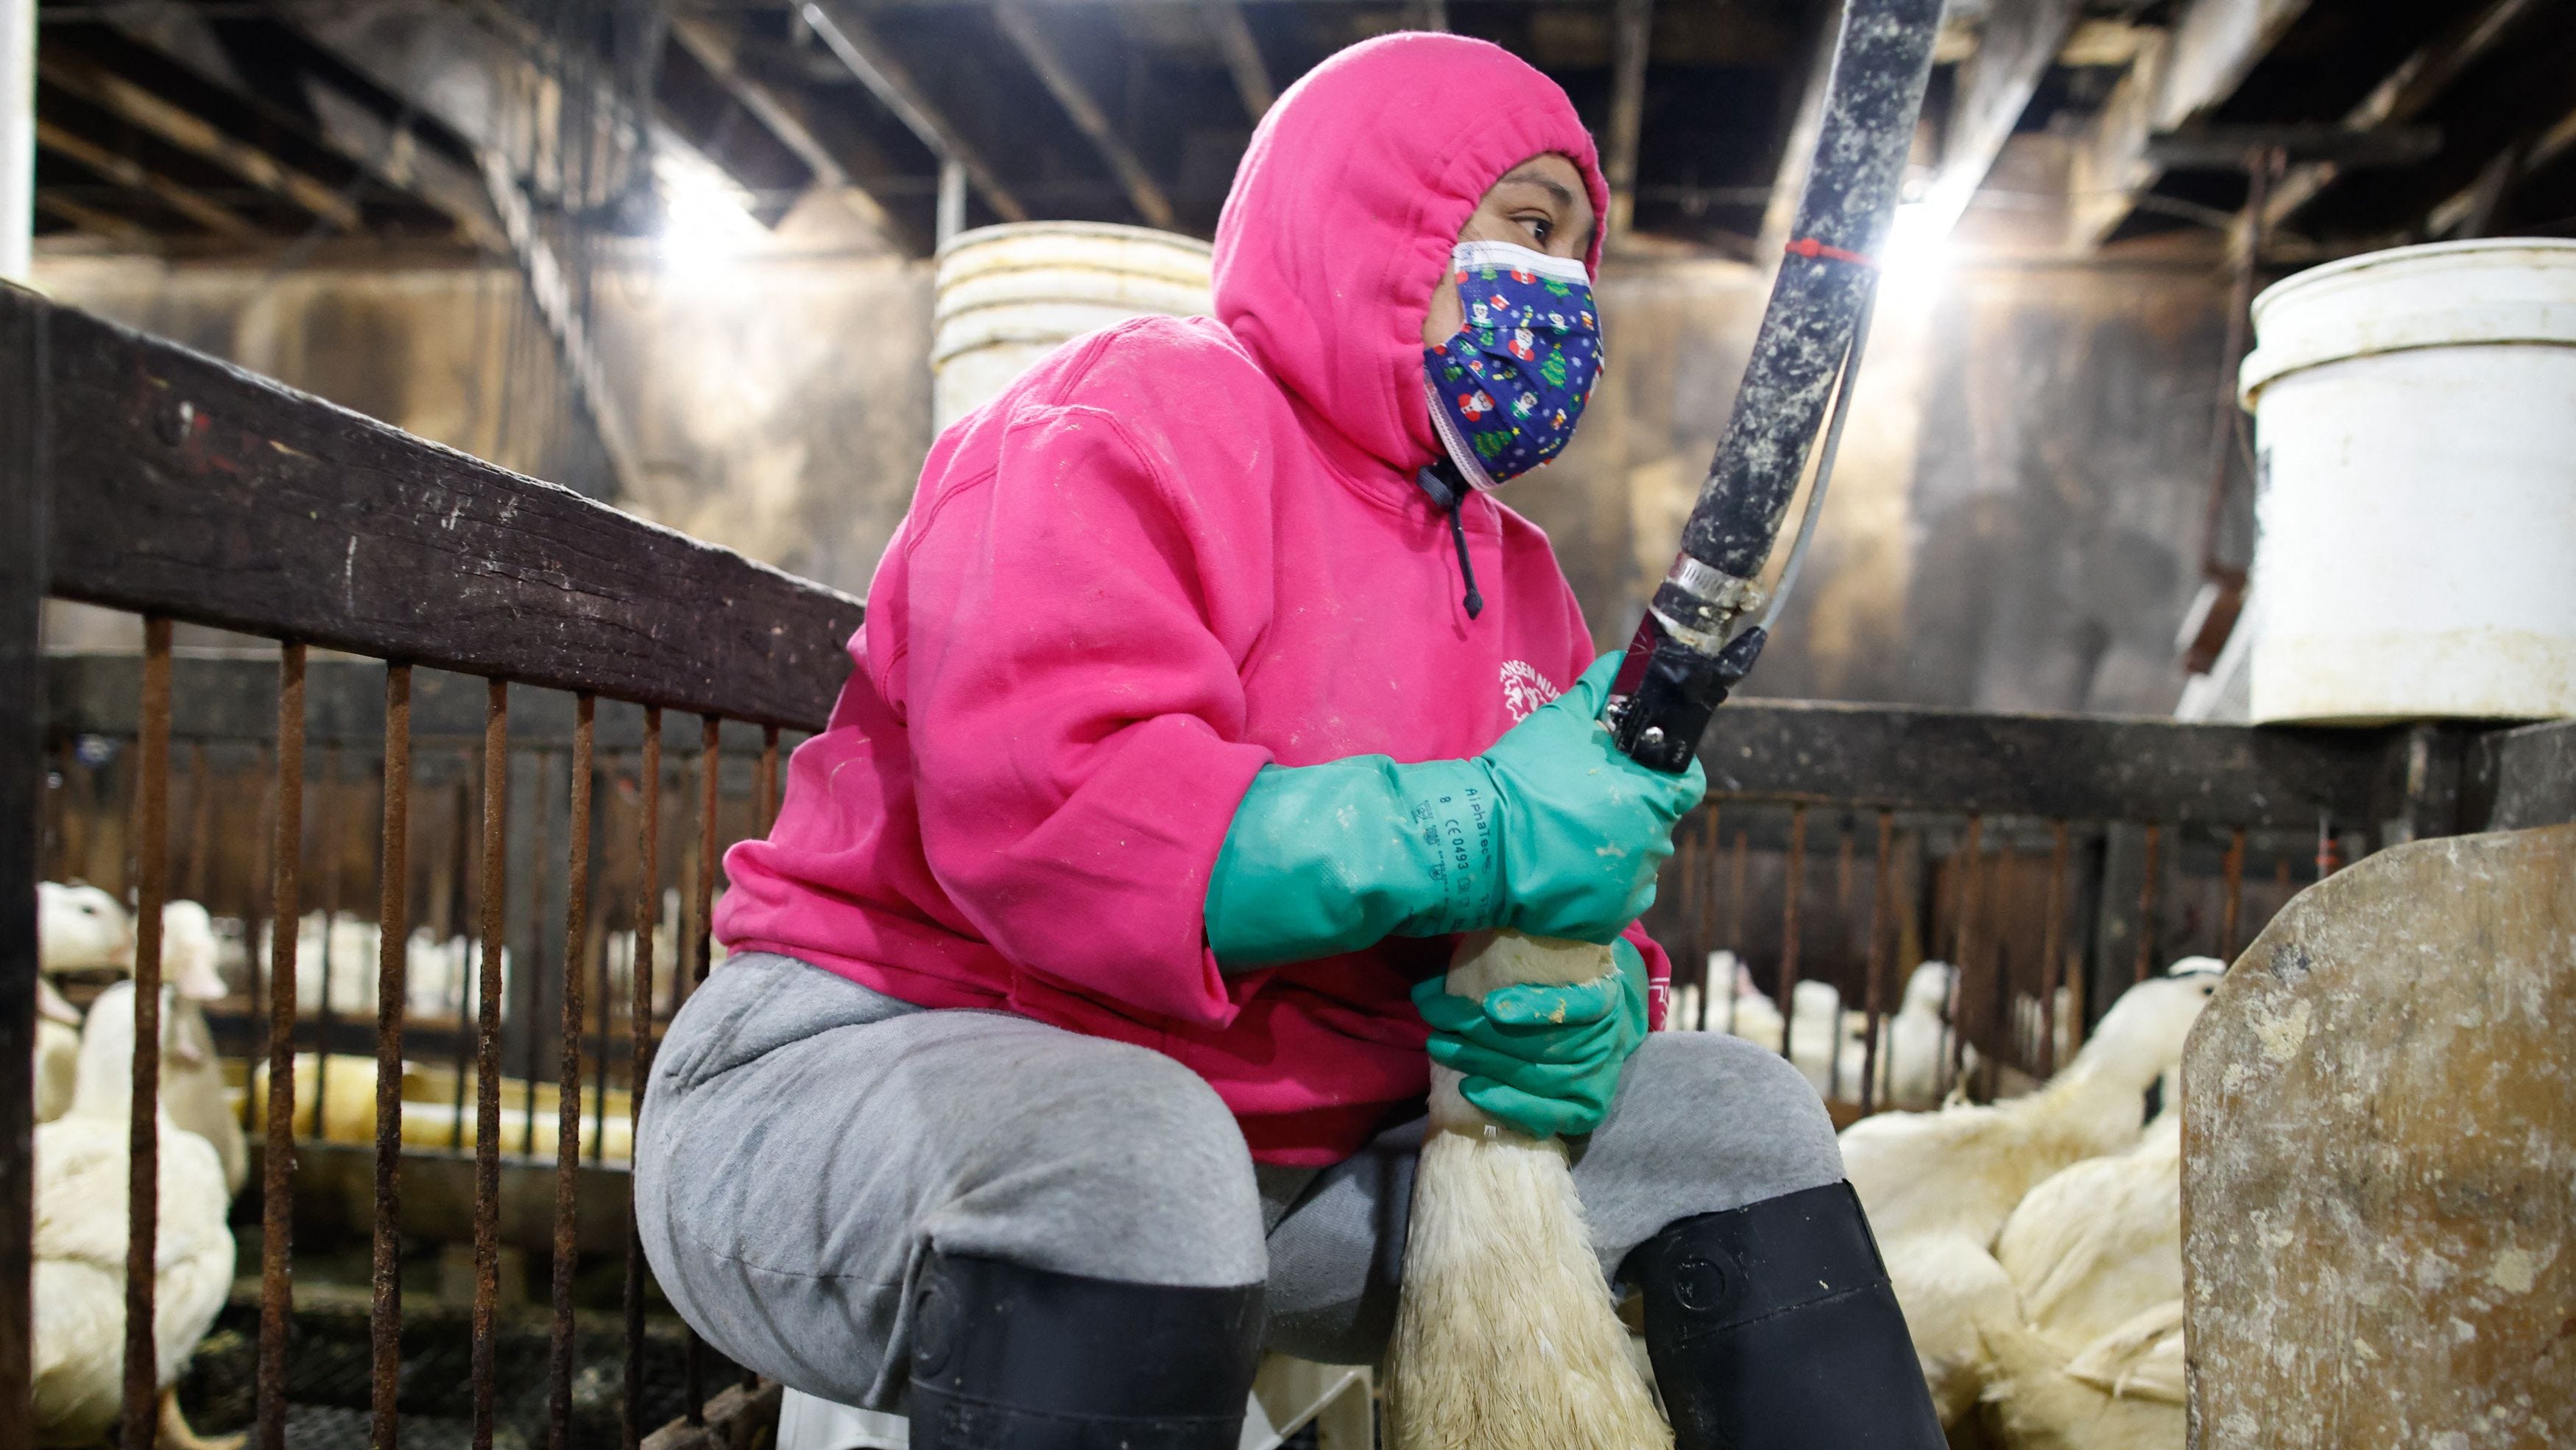 An employee feeds ducks at Hudson Valley Foie Gras in Ferndale, New York, on March 3, 2023.